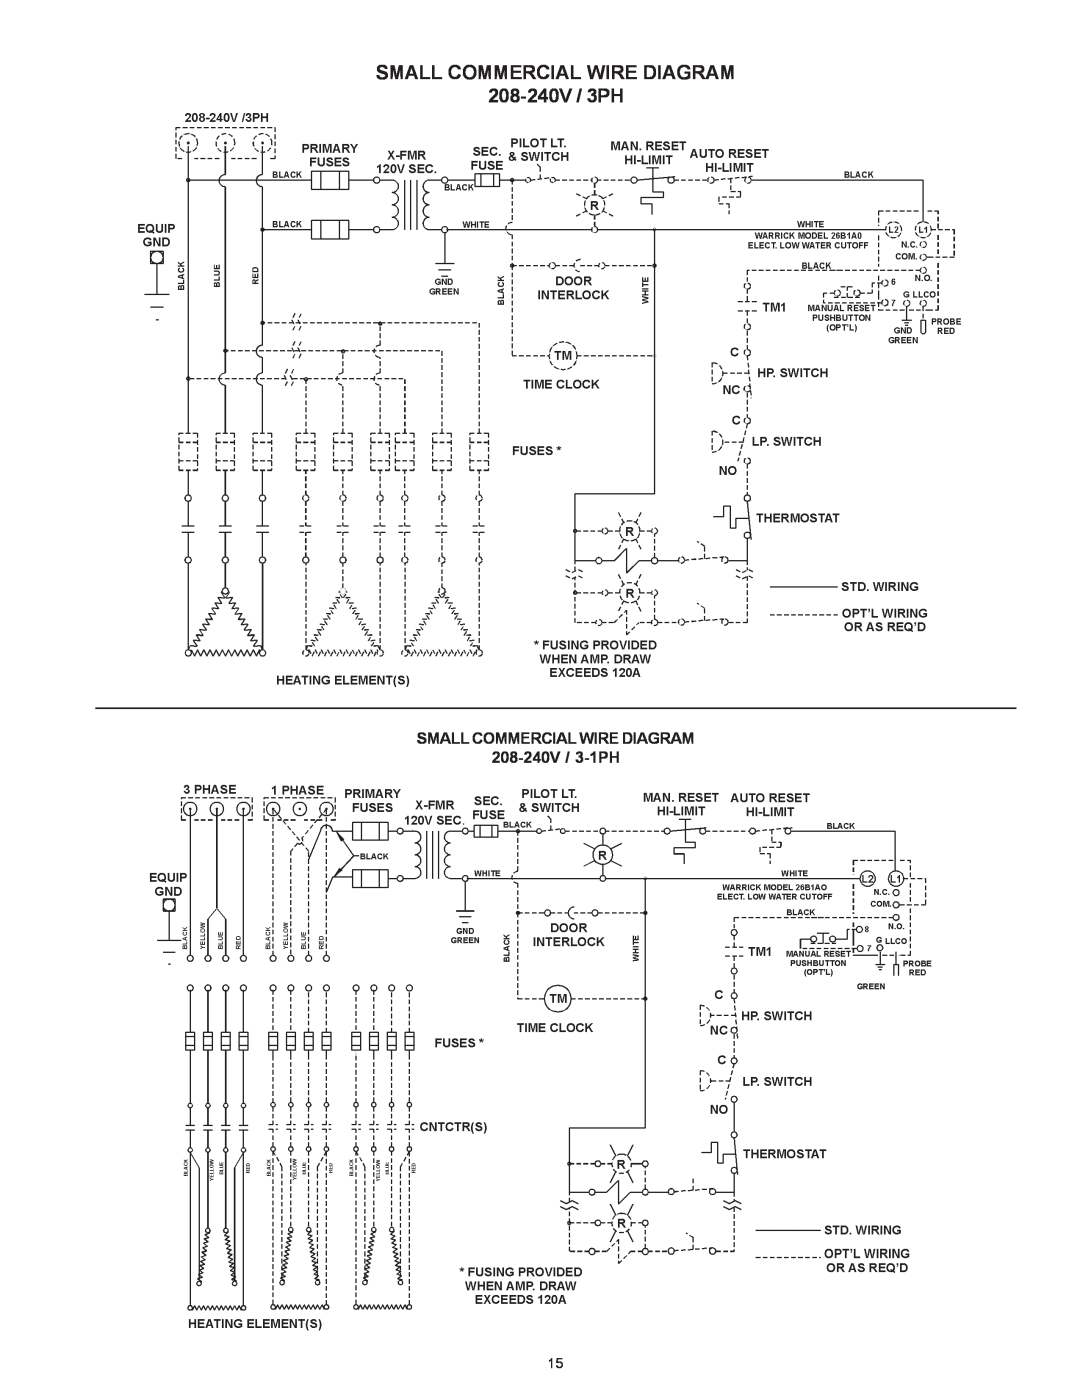 State Industries SSE-120 SMALL COMMERCIAL WIRE DIAGRAM 208-240V / 3PH, SMALL COMMERCIAL WIRE DIAGRAM 208-240V / 3-1PH 